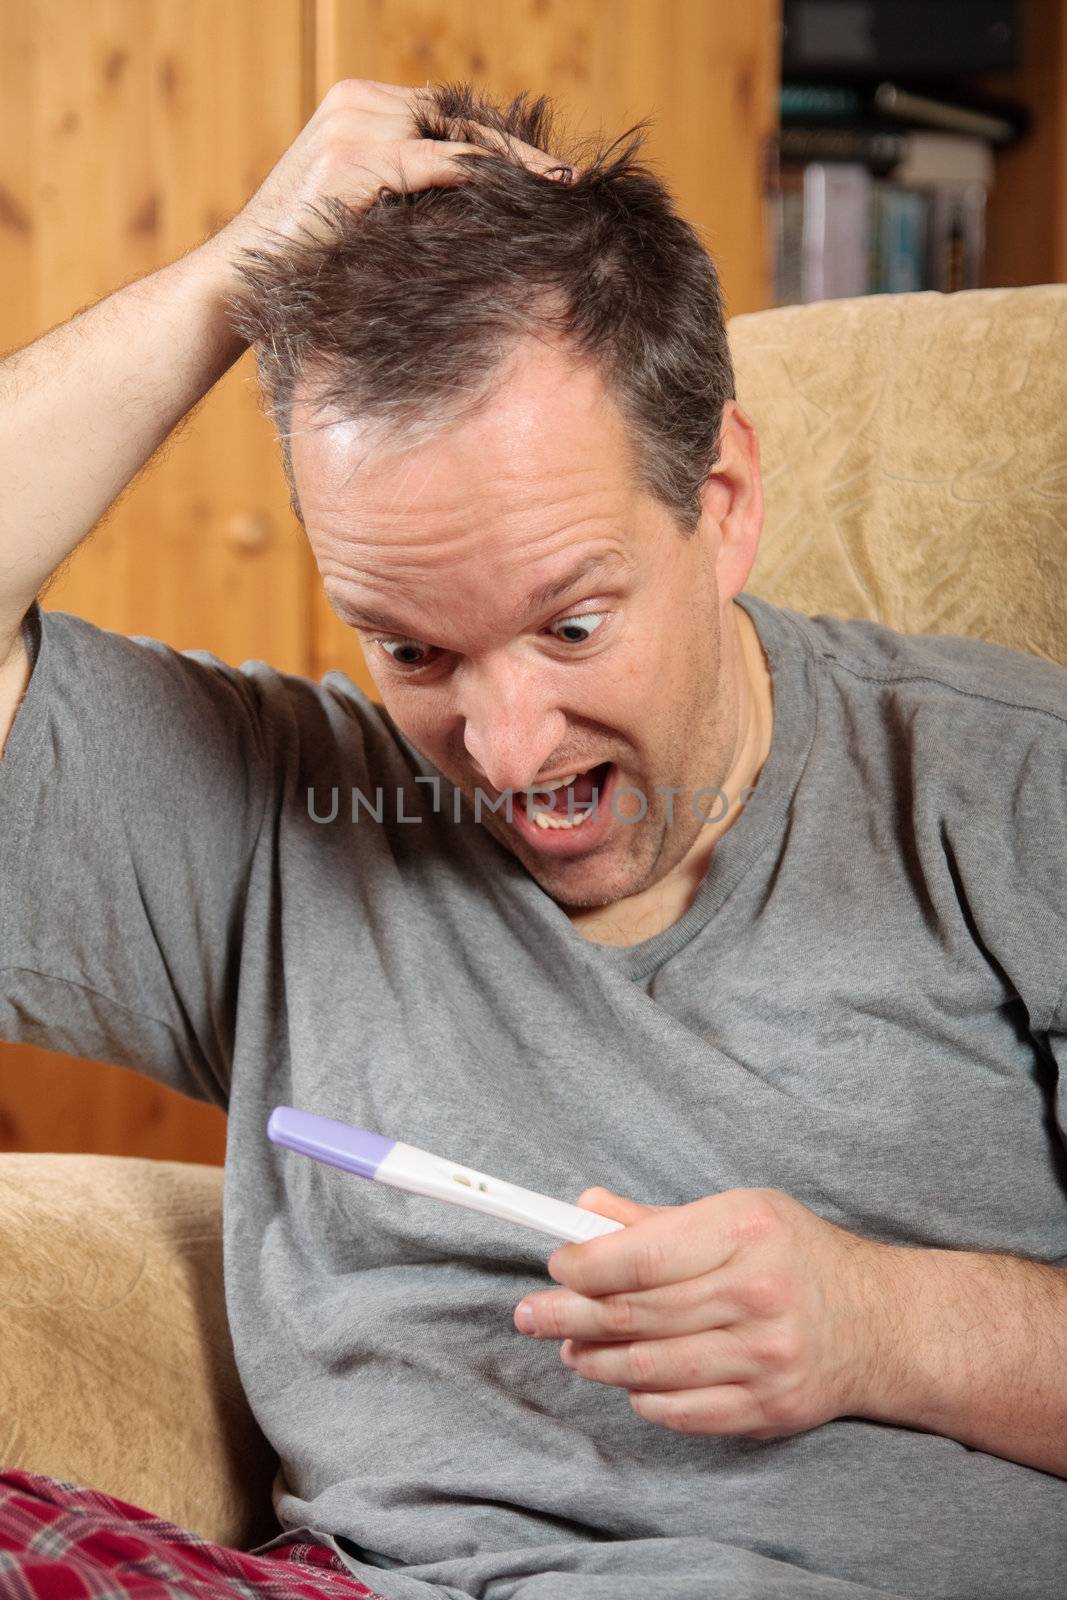 Man holding a pregnancy test by Talanis